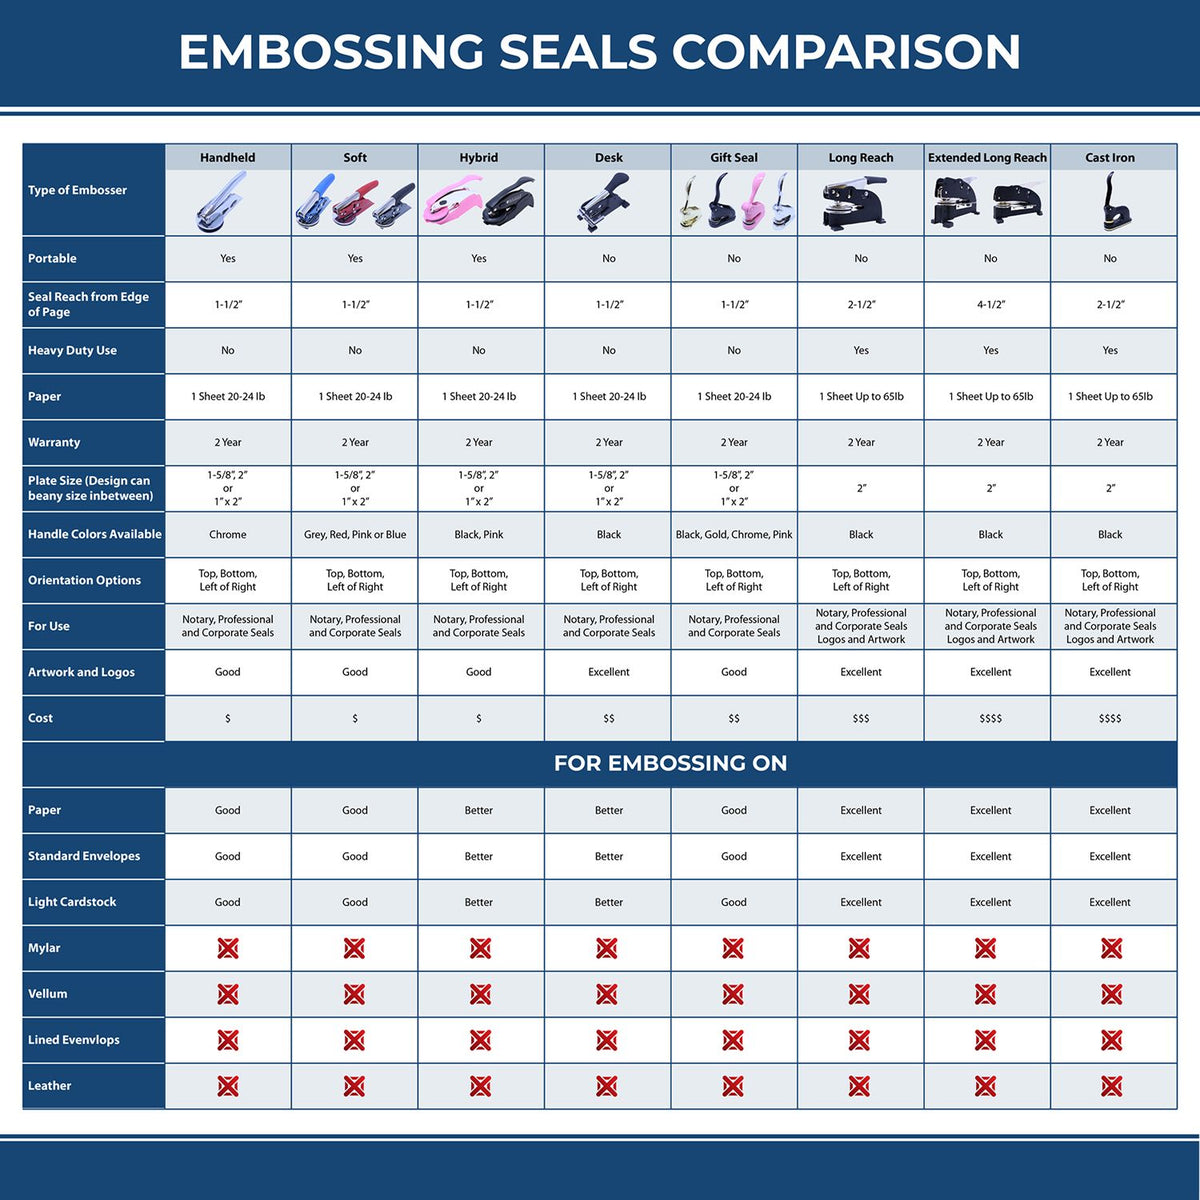 A comparison chart for the different types of mount models available for the Soft Pocket New Hampshire Landscape Architect Embosser.